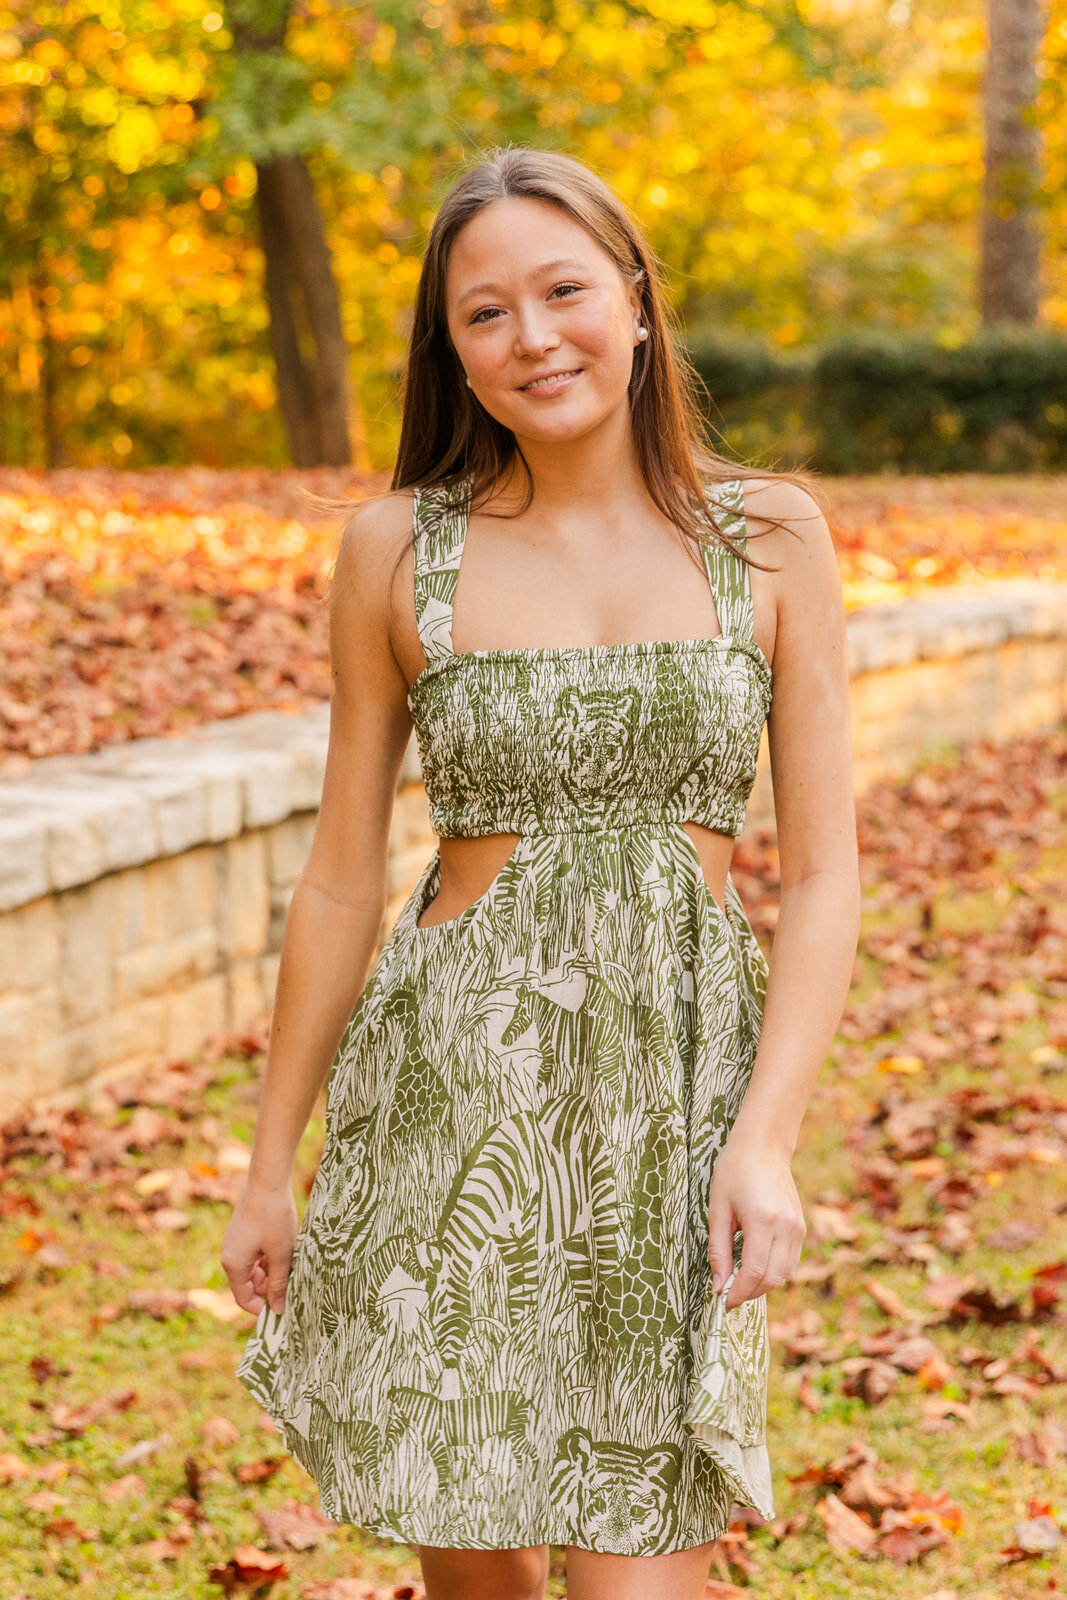 Fall senior session highschool girl paying with her dress in an Atlanta park by Laure photography